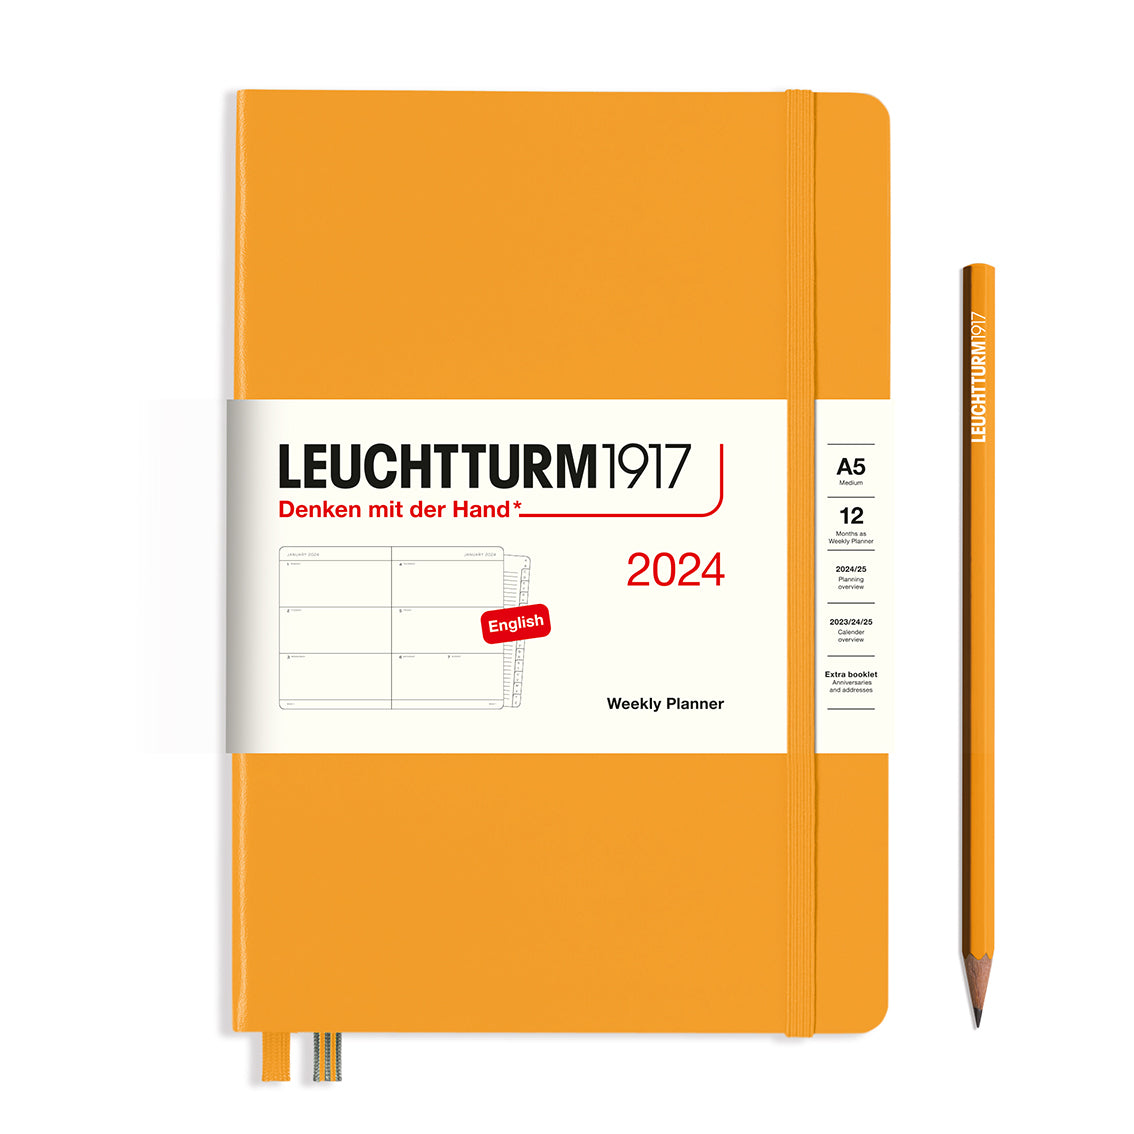 An image of an orange planner with an orange elastic band holding it together and a cream paper wrap around the middle stating the business name Leuchtturm1917, that it is for the year 2024, it is a weekly planner, is A5 in size and an English language version. It has an image on the wrap showing the inside layout which is a week spread across 2 pages. An orange pencil is shown at the side of the planner.